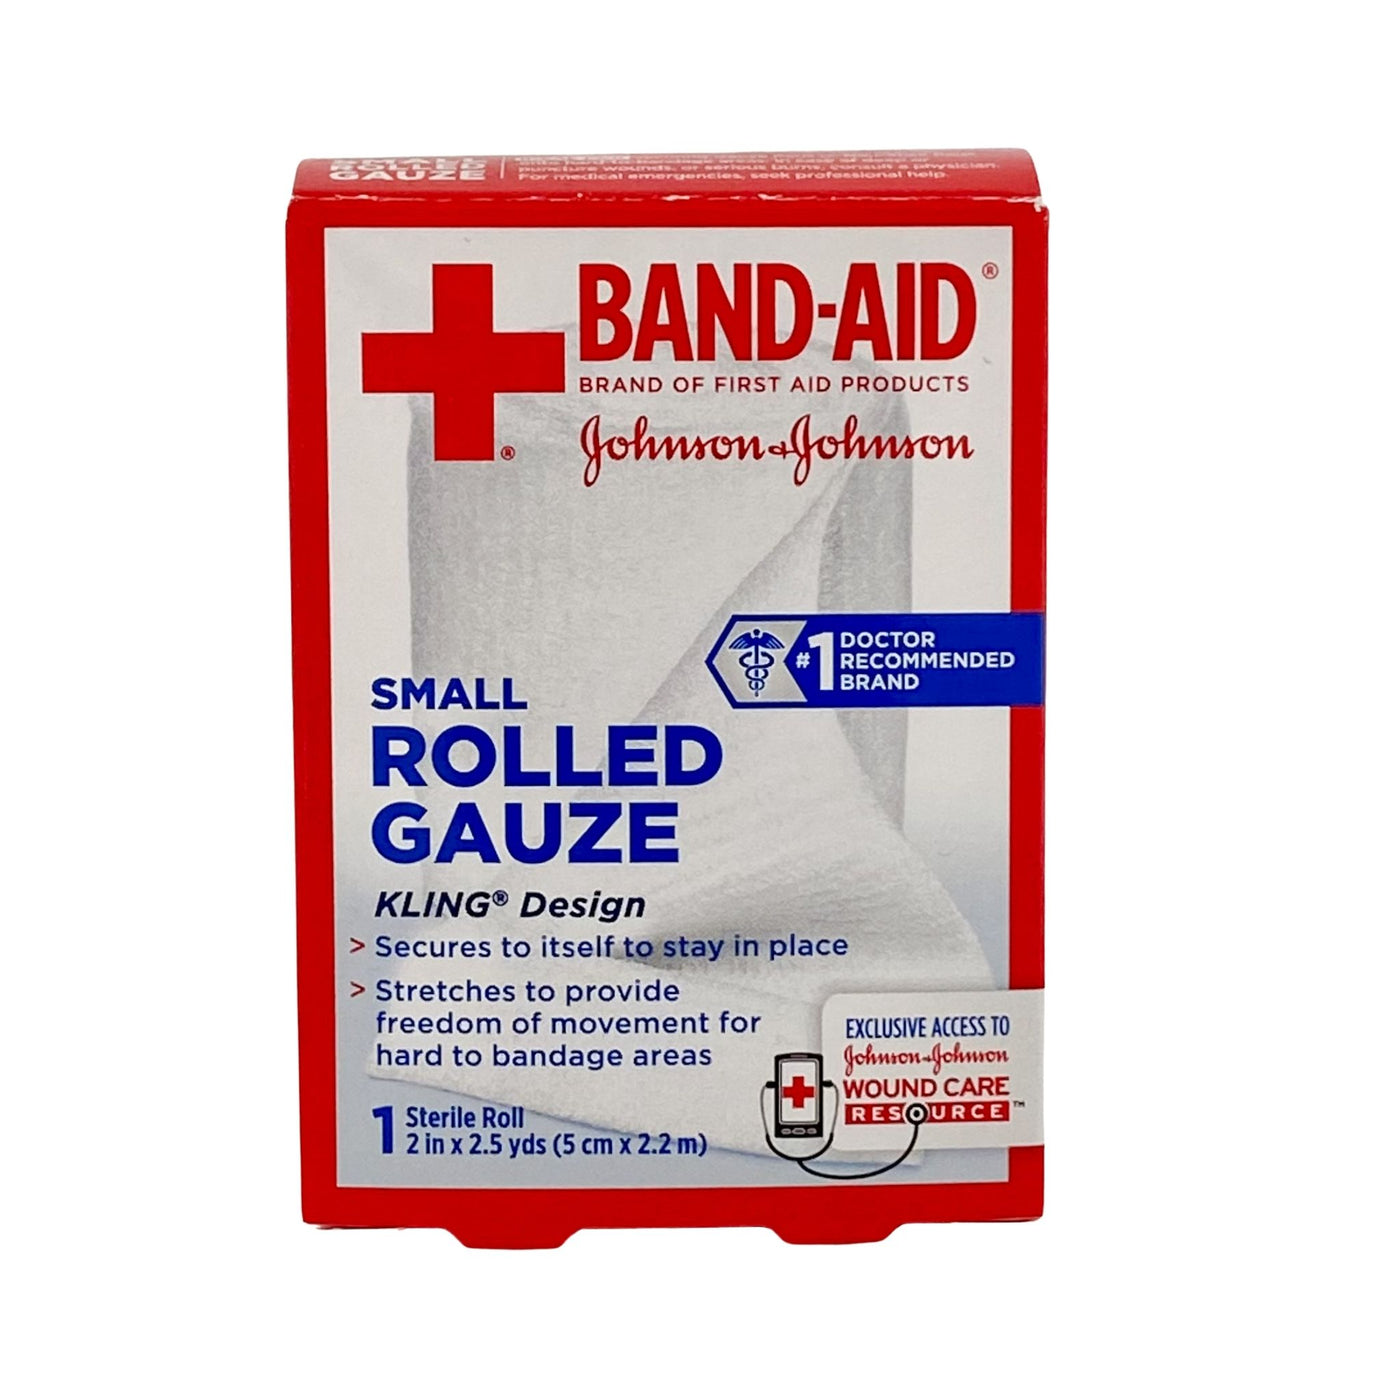 Flexible Rolled Gauze Bandage Roll for First Aid